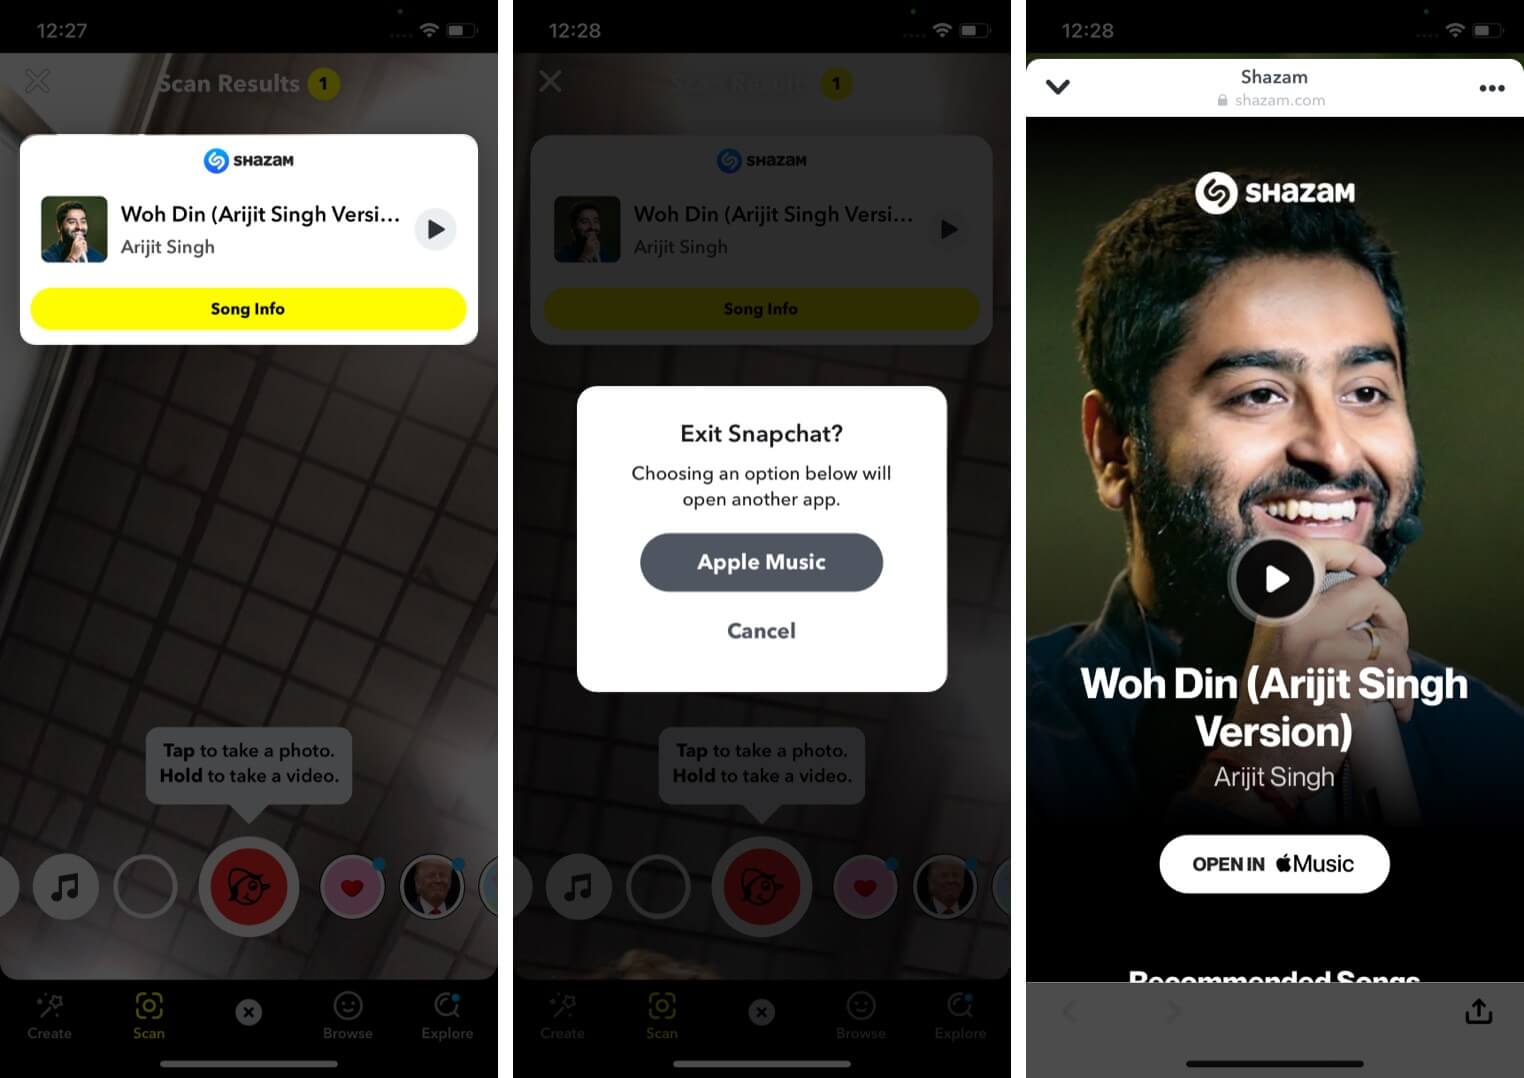 How to Shazam a song on Snapchat